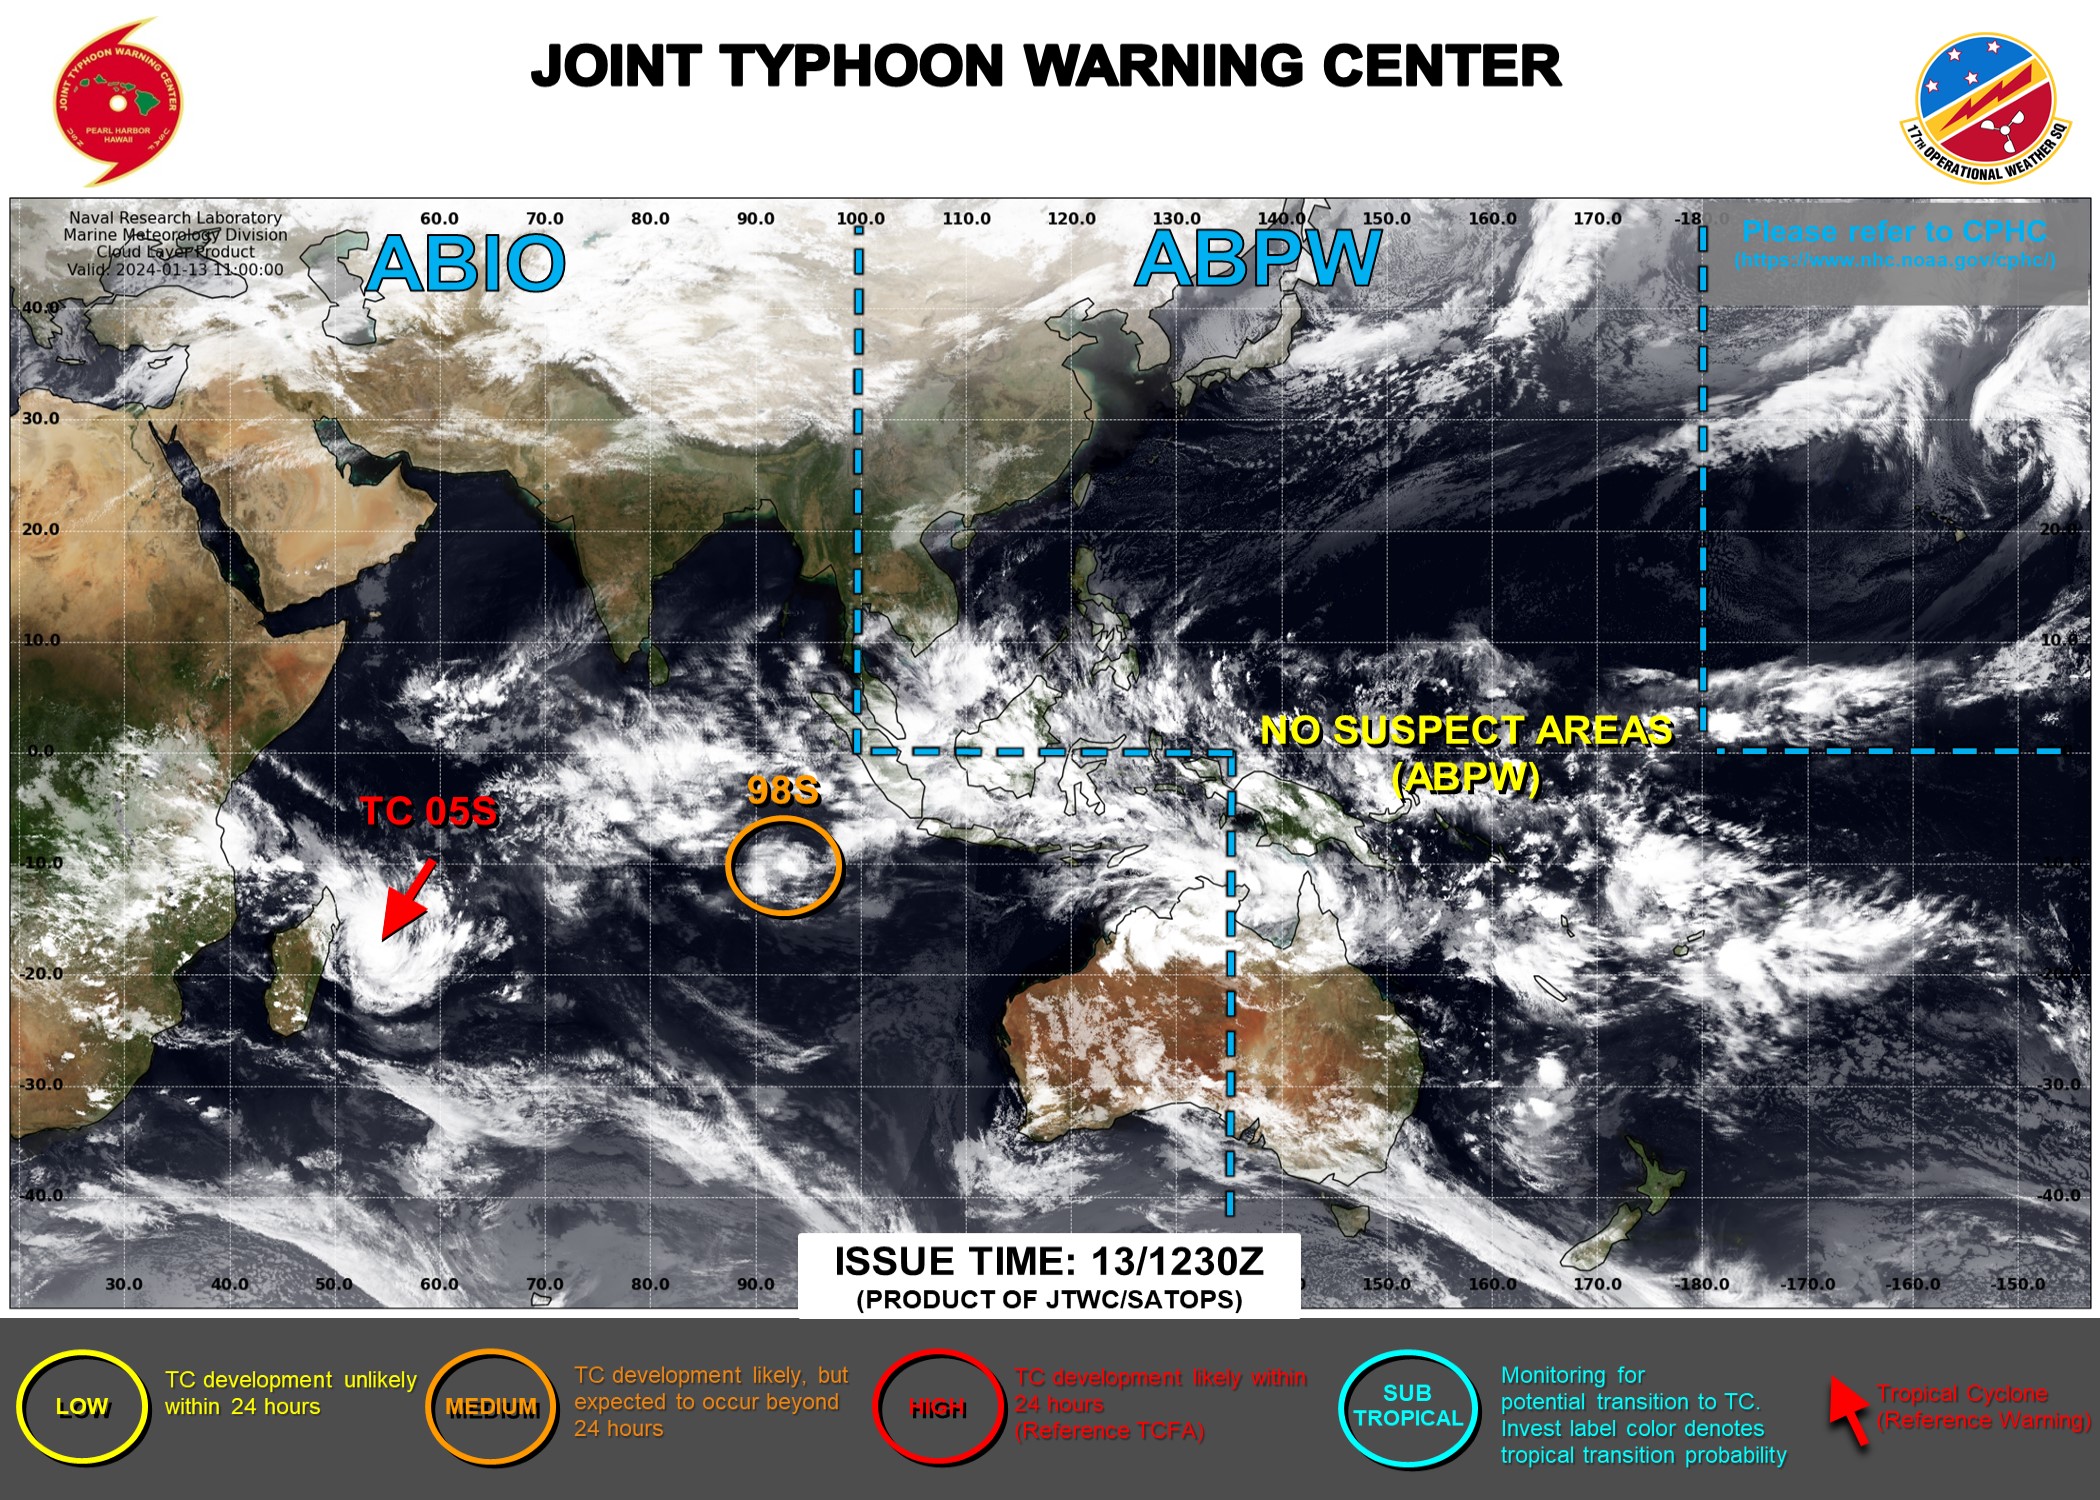 JTWC IS ISSUING 12HOURLY WARNINGS AND 3HOURLY SATELLITE BULLETINS ON TC 05S(BELAL).